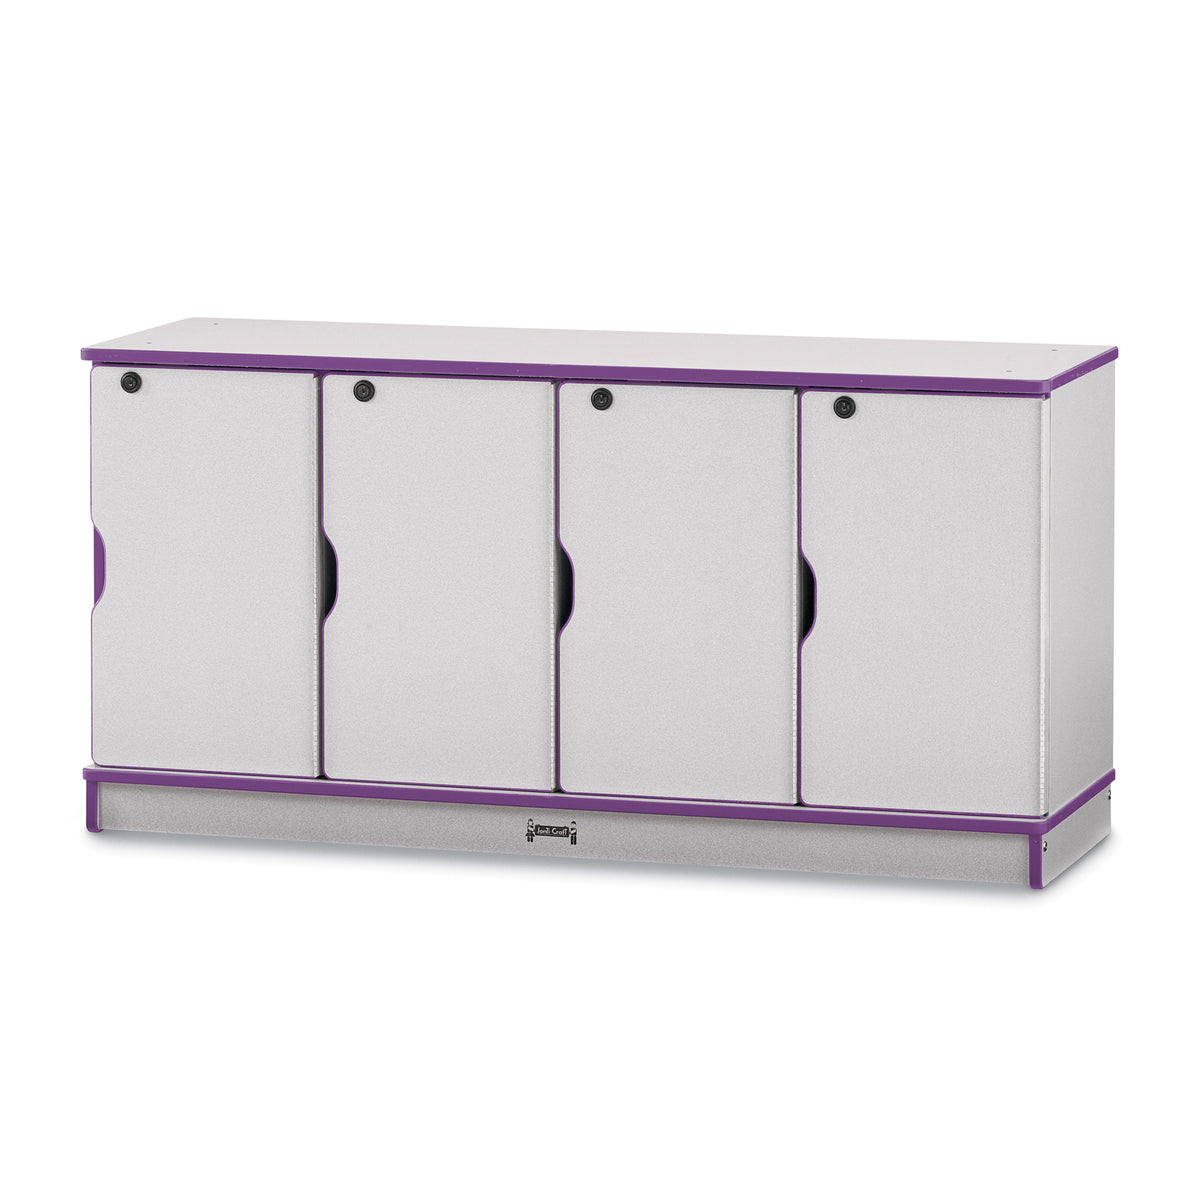 4688JC004, Rainbow Accents Stacking Lockable Lockers -  Single Stack - Purple